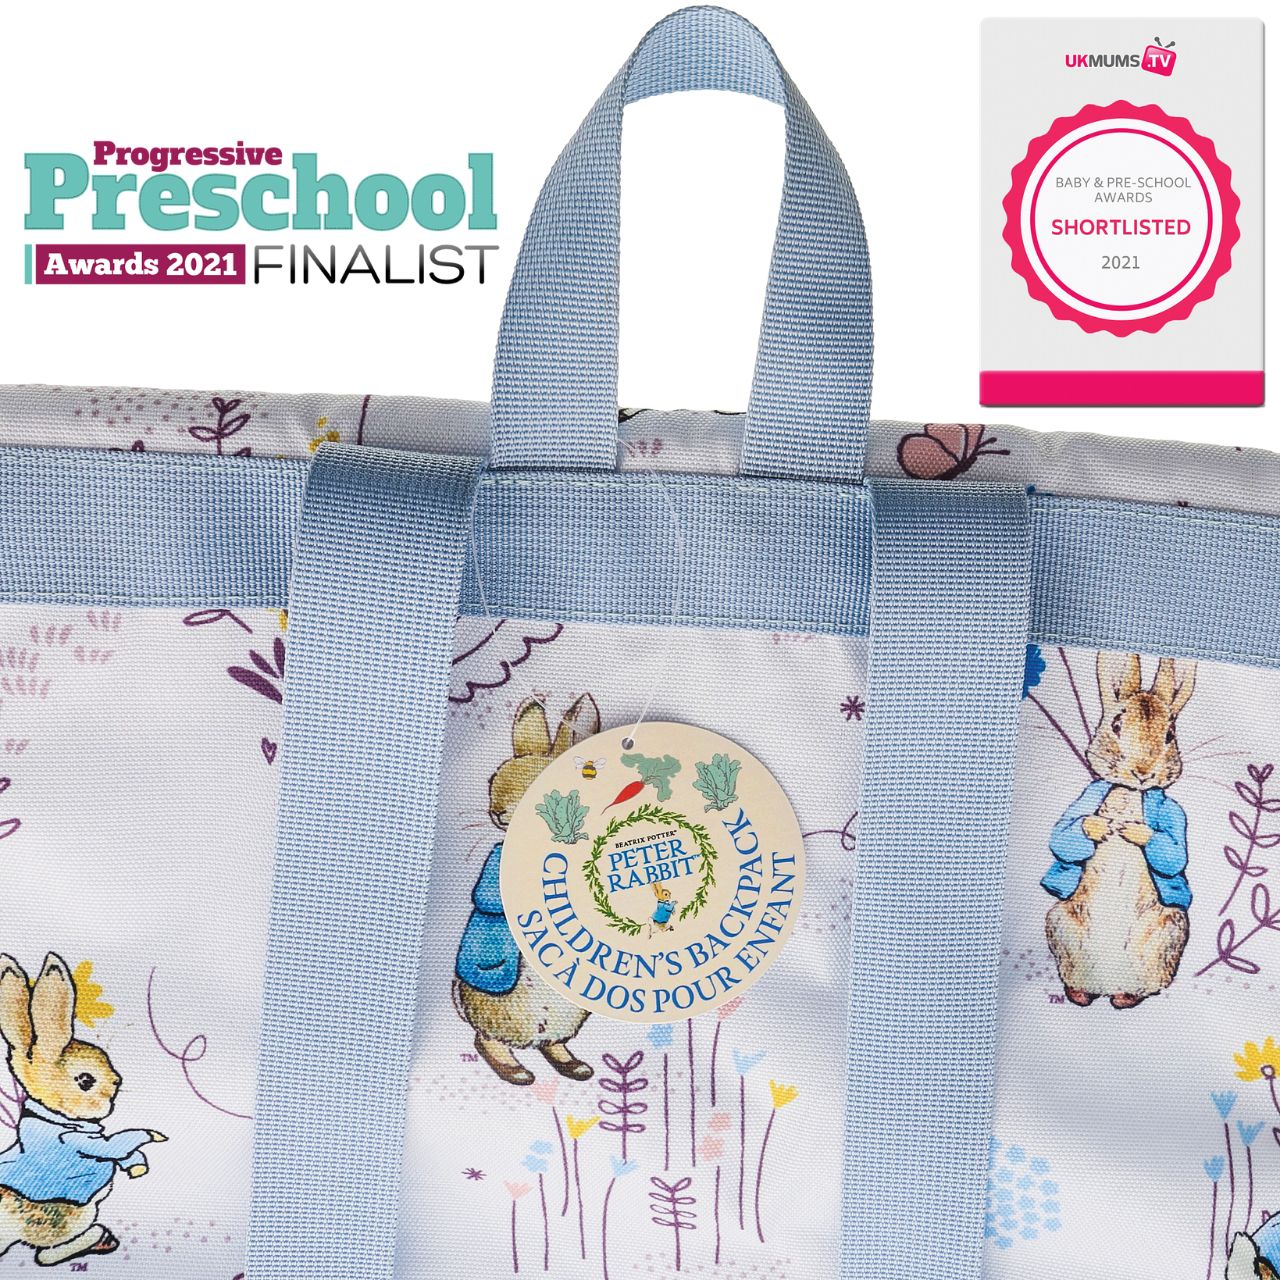 Beatrix Potter Peter Rabbit Children's Backpack  This adorable Peter Rabbit Back is made from high quality material and also features a waterproof fabric lining, perfect for outdoor adventures, sleepovers and school. This is a fun and practical backpack, has been perfectly detailed with original illustrations, taken from the Beatrix Potter stories.